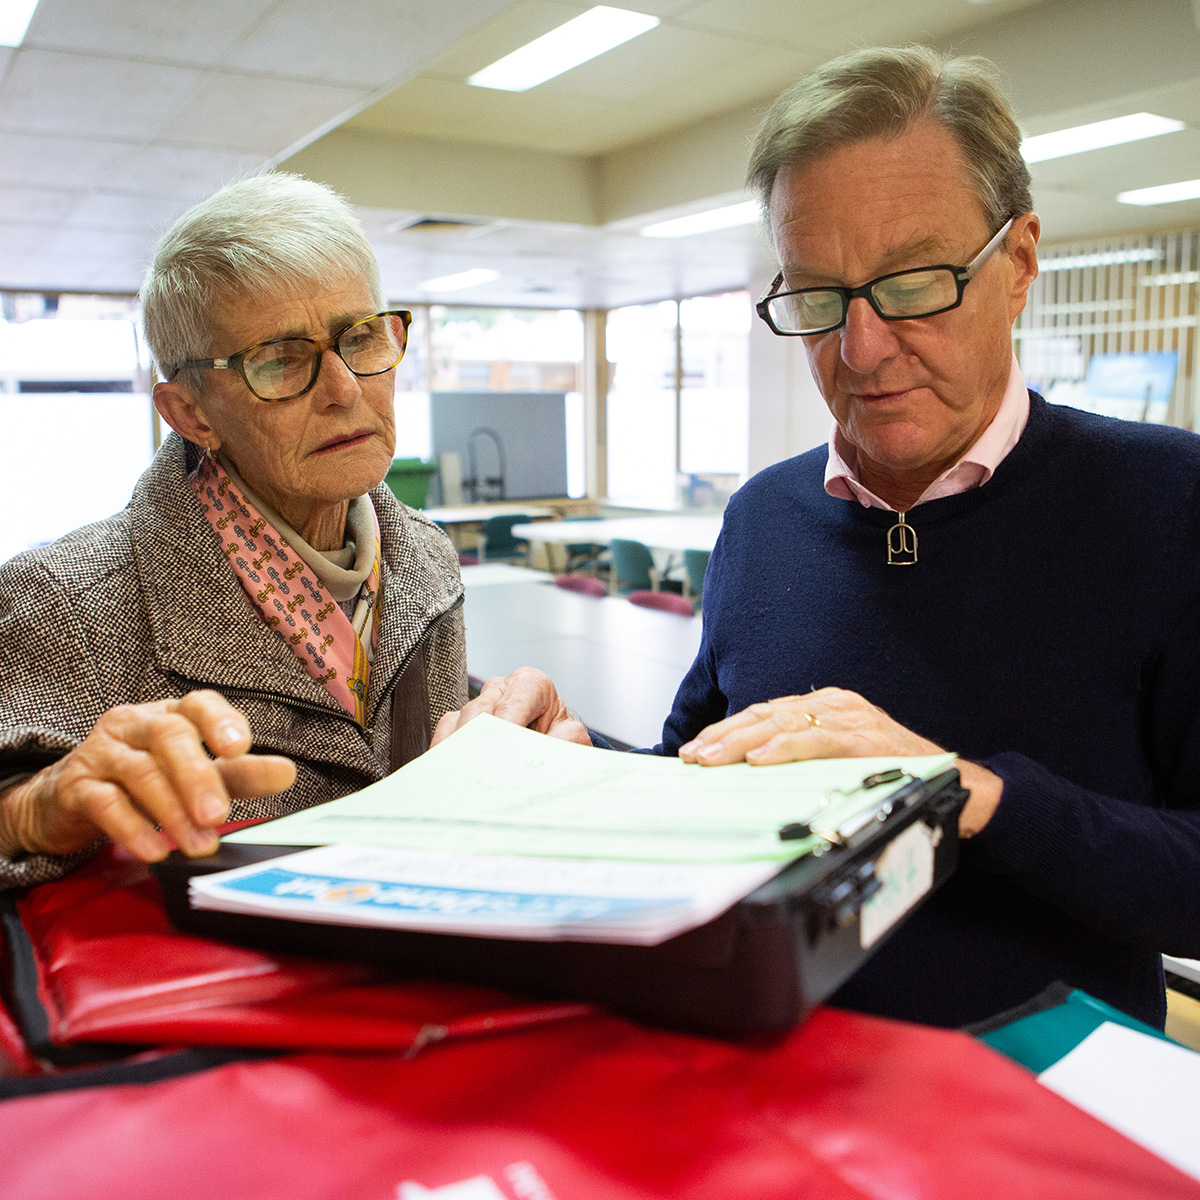 Volunteers are an integral part of City of Parramatta’s Community Care services. We need motivated individuals to join our valued volunteer team so that this quality and meaningful service continues to be delivered. Volunteer today and make a difference: cityofparramatta.co/44Oe8kM